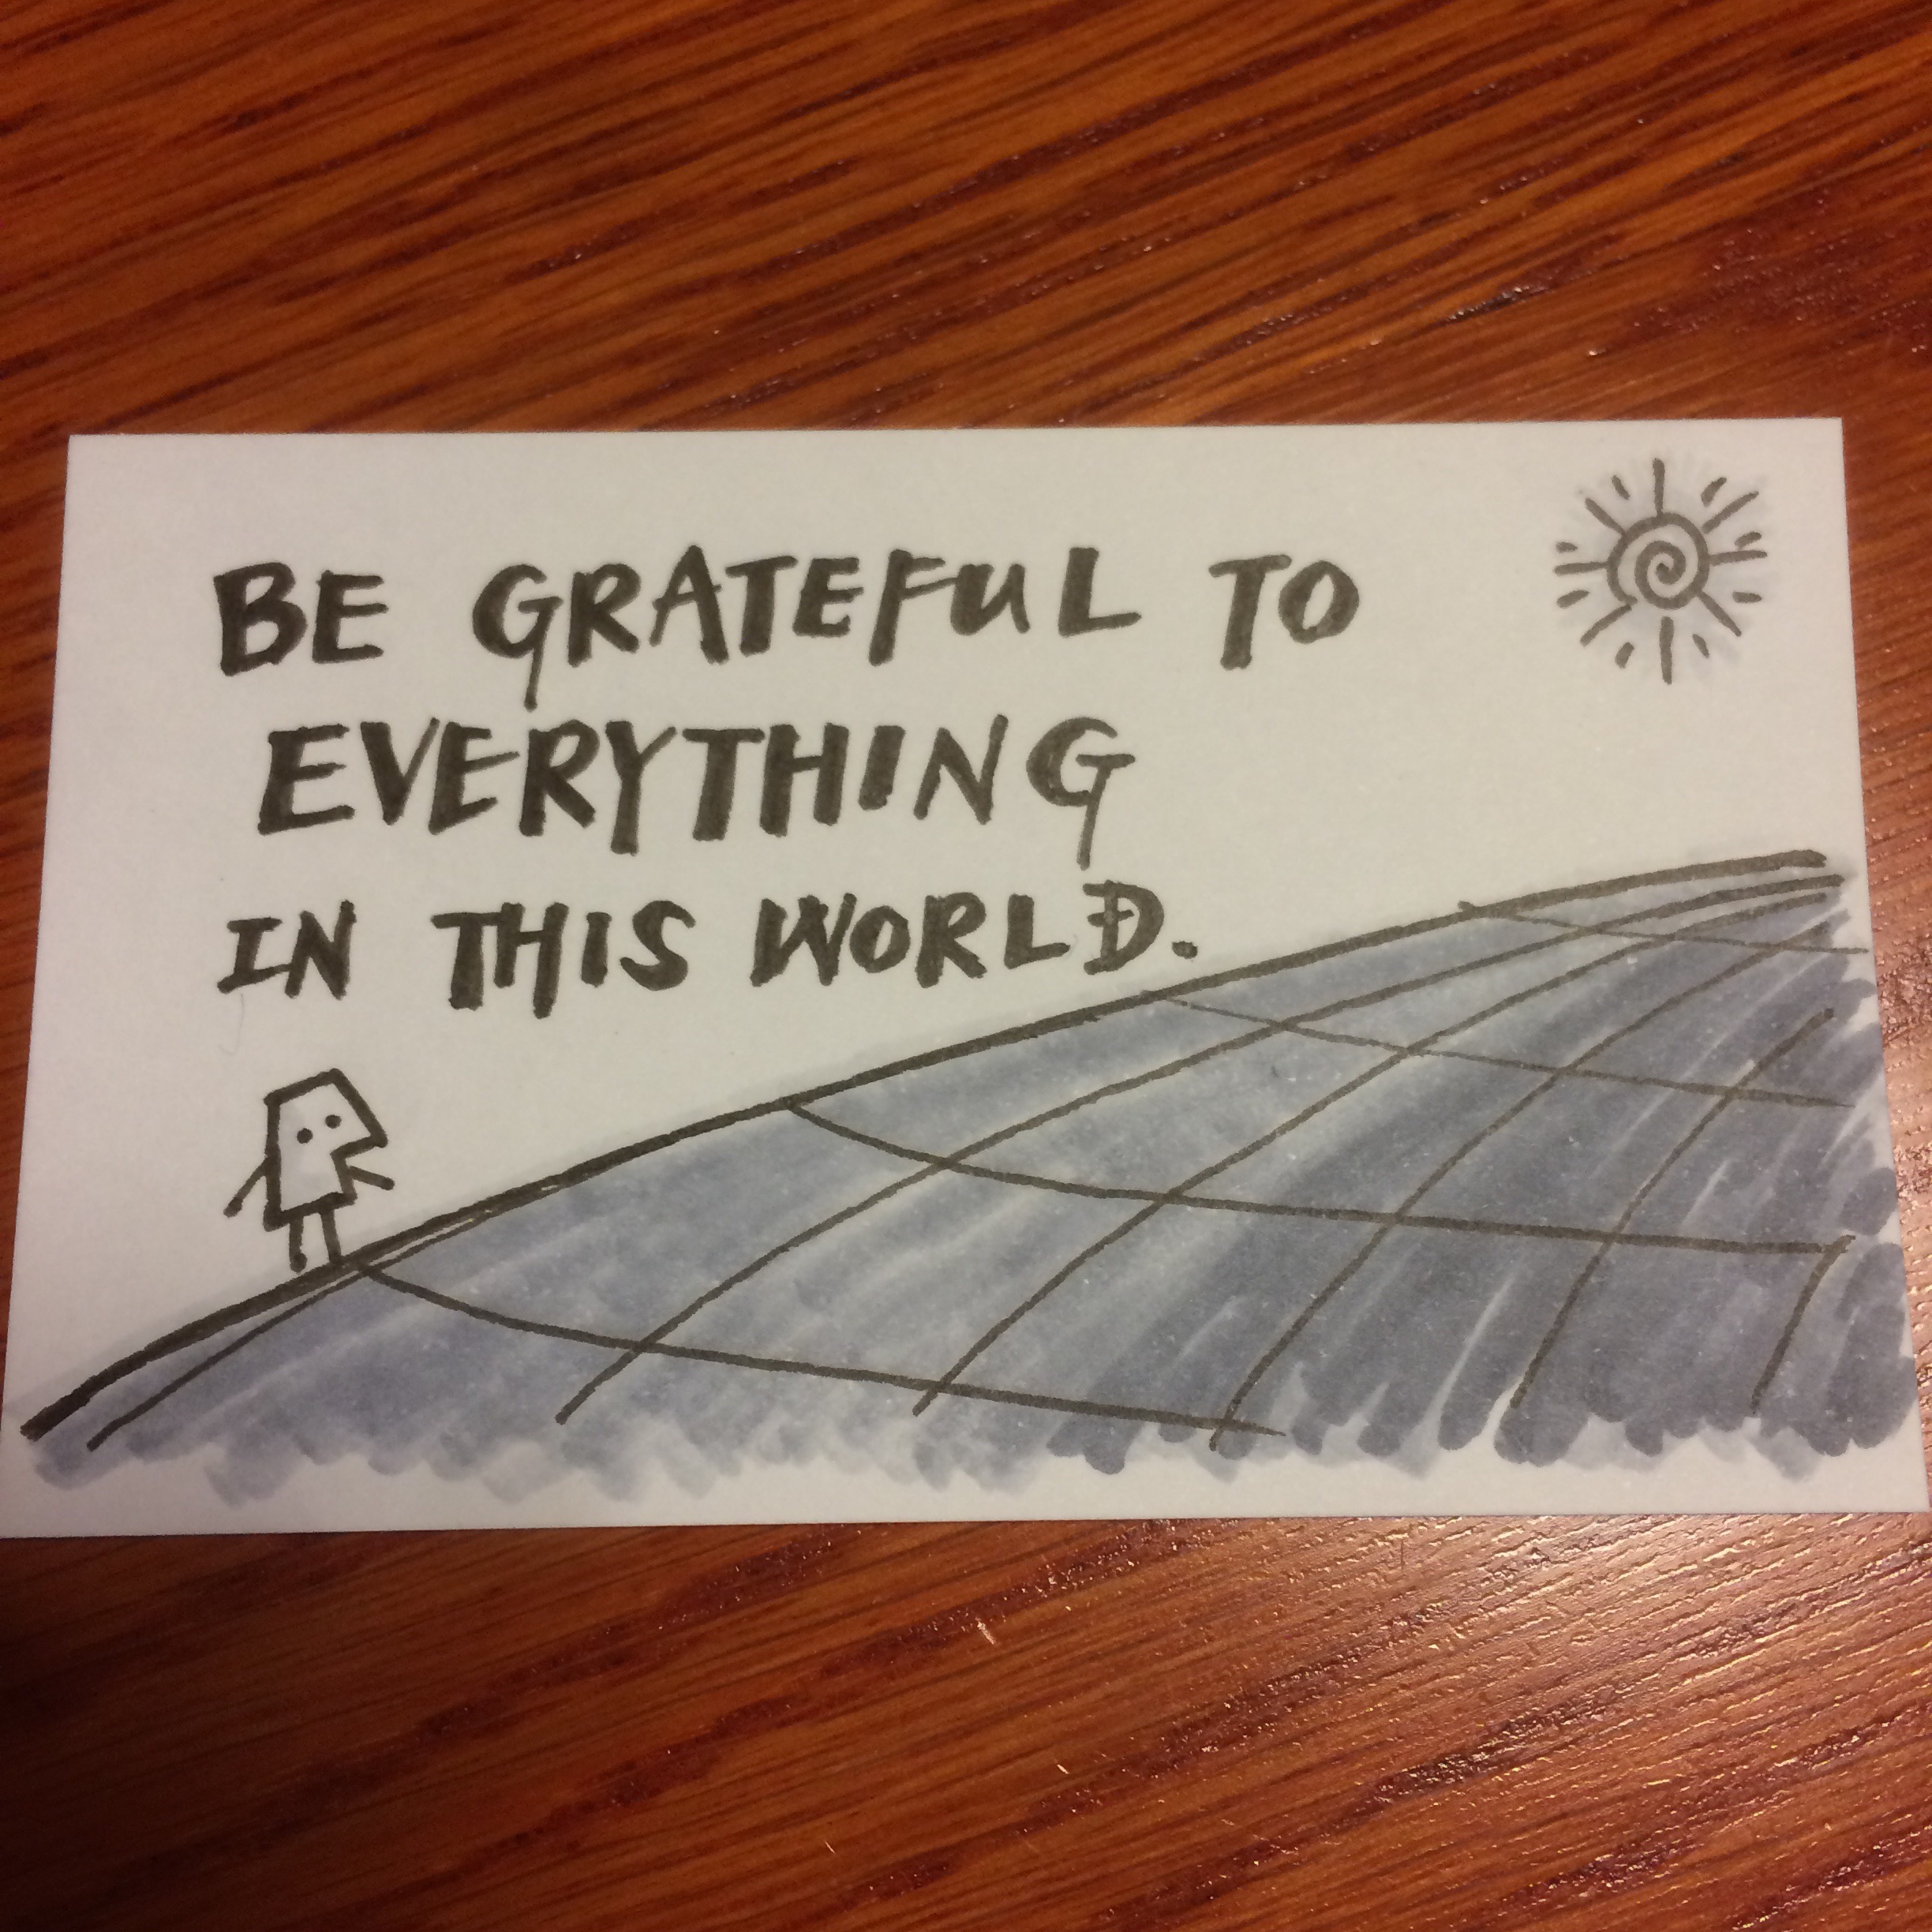 Be grateful to everything in this world.